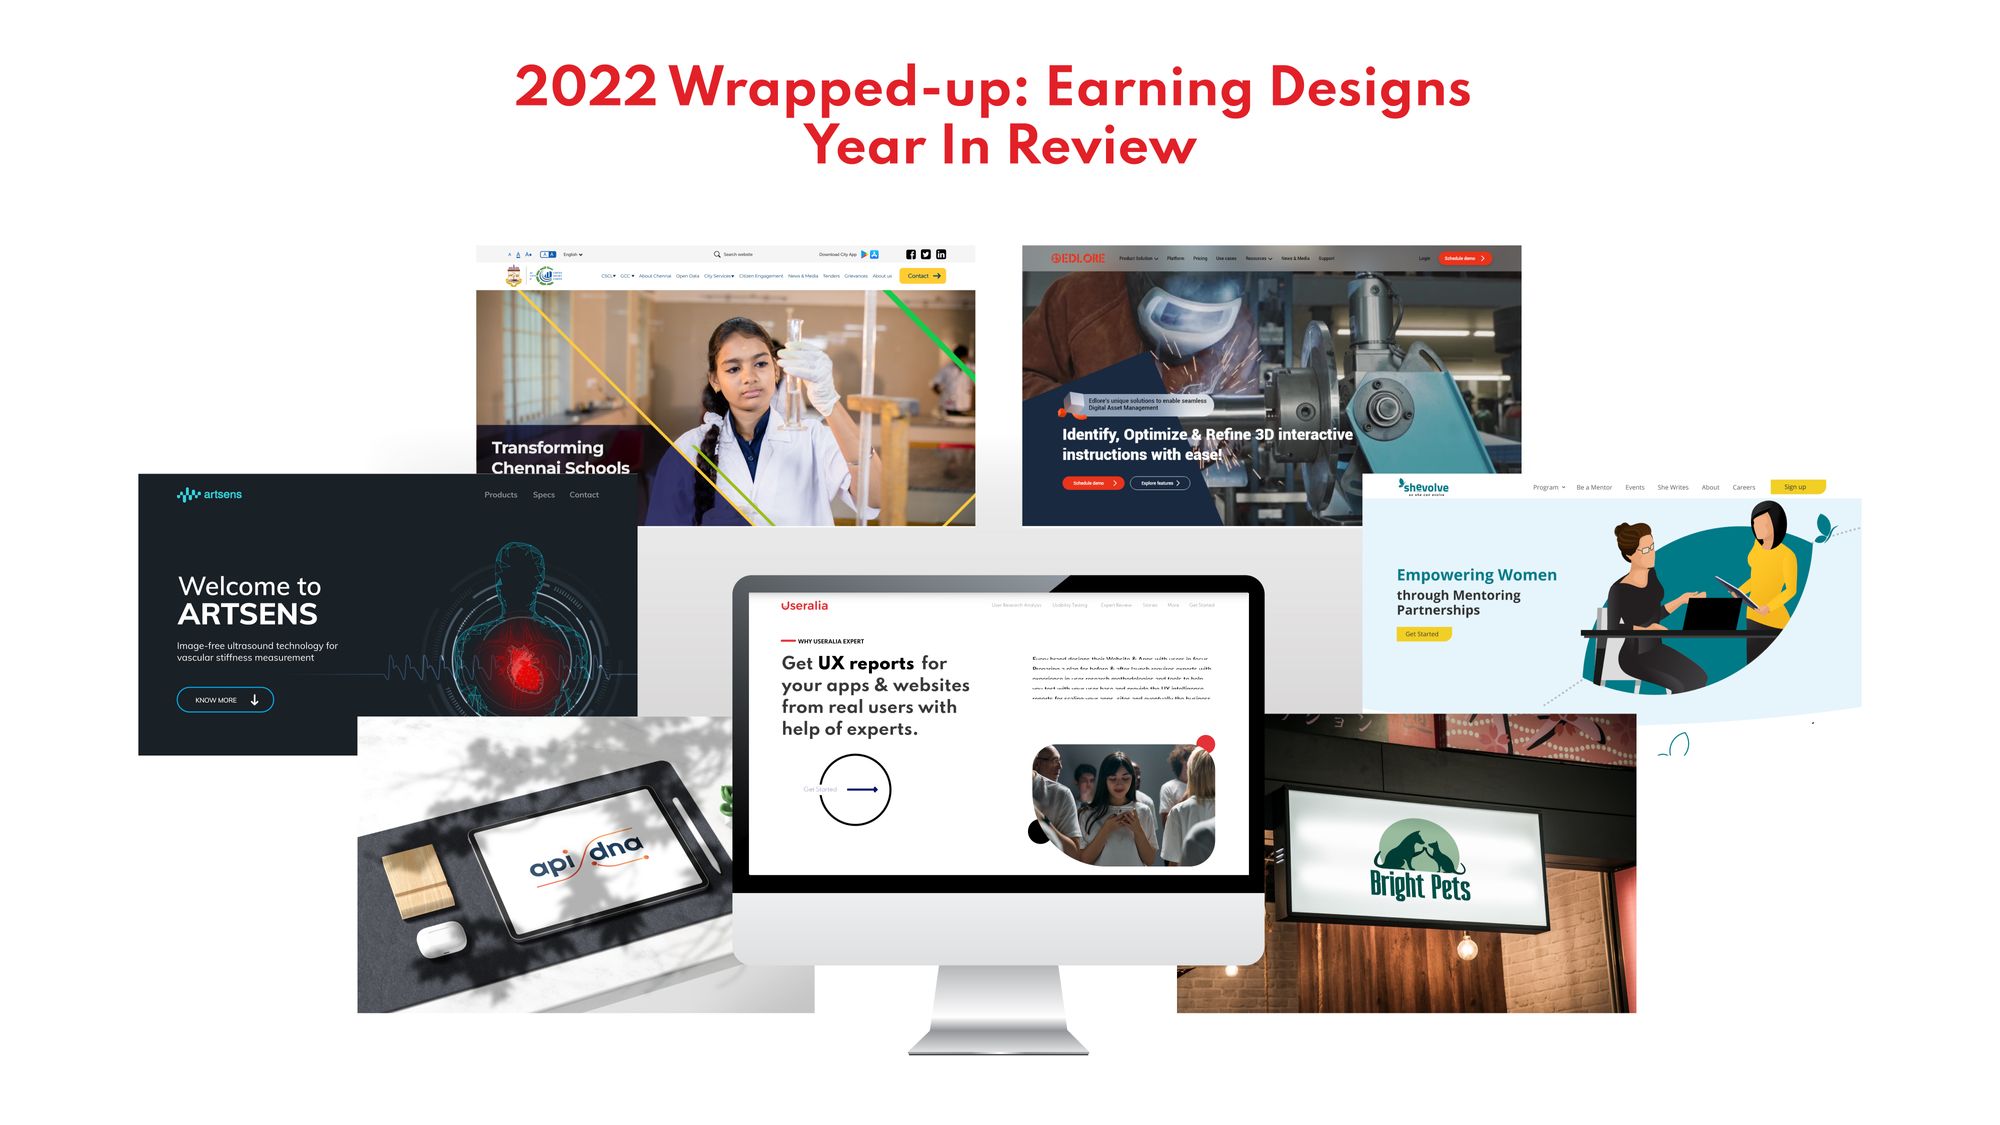 2022 Wrapped-up: Earning Designs Year-in-Review